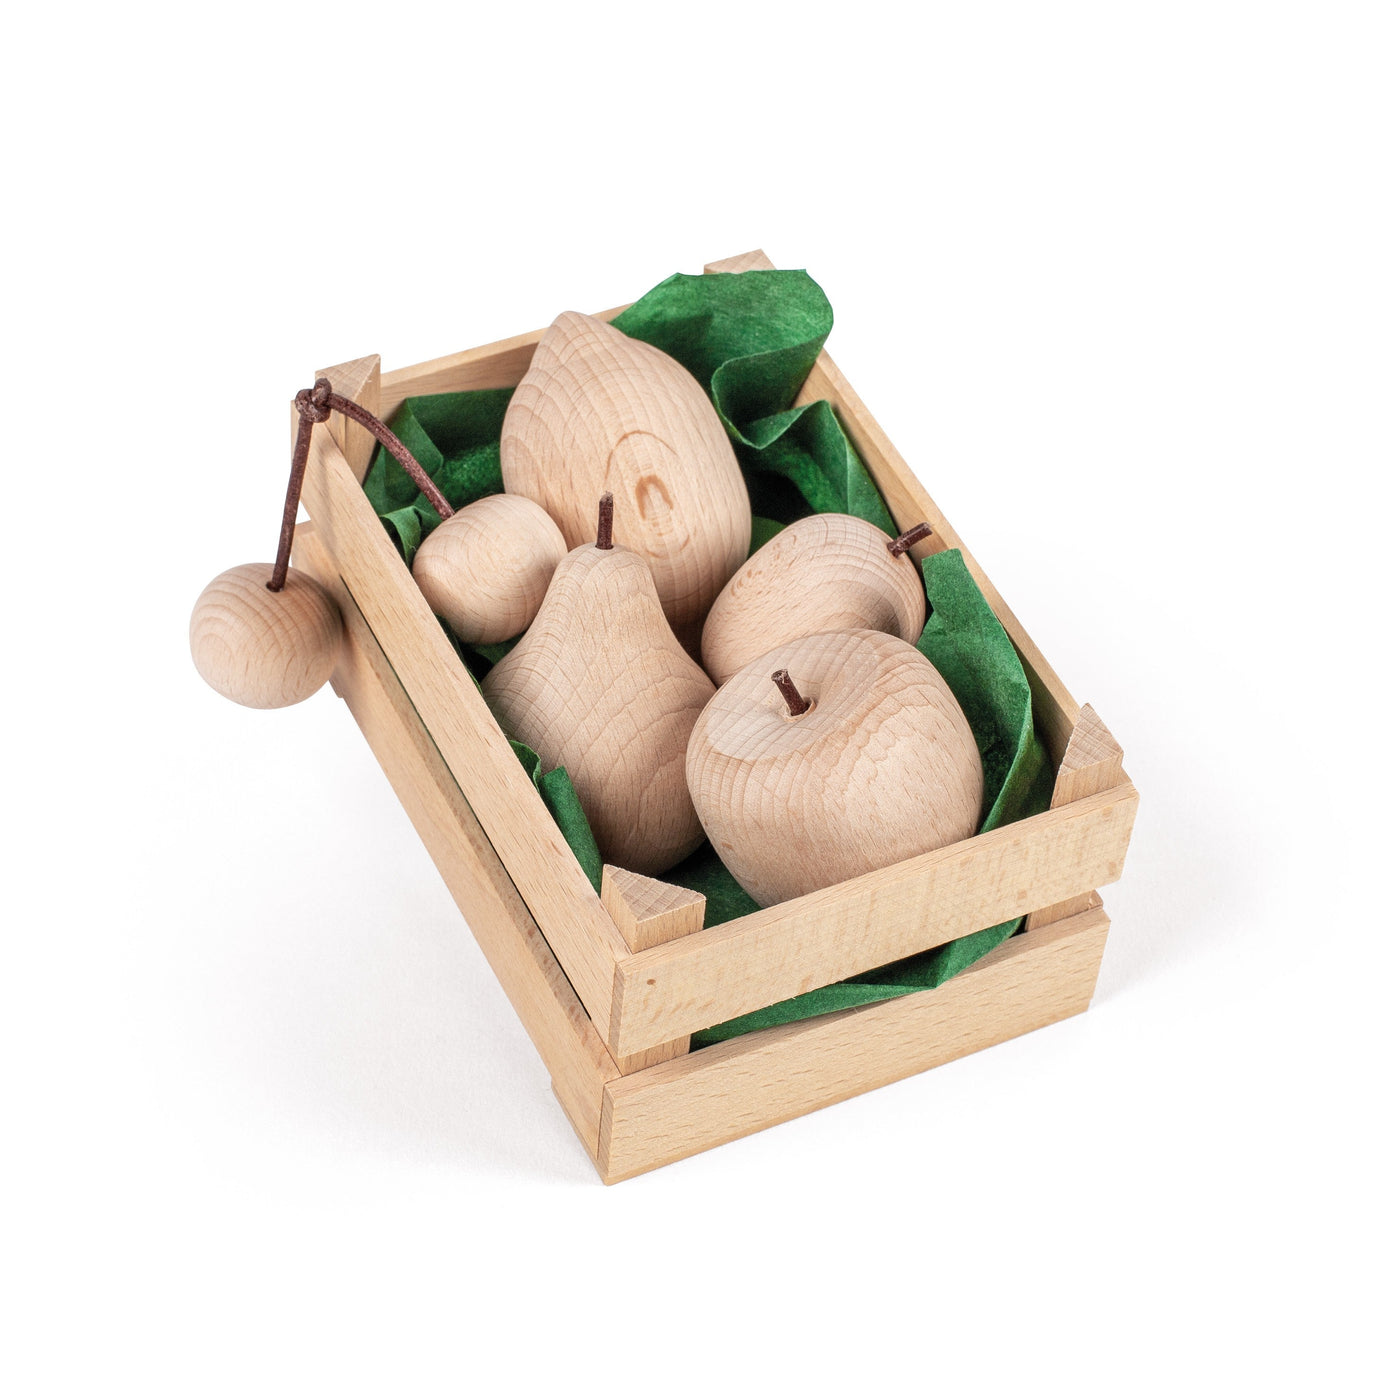 Erzi Assorted Natural Fruits in Crate - Wooden Play Food